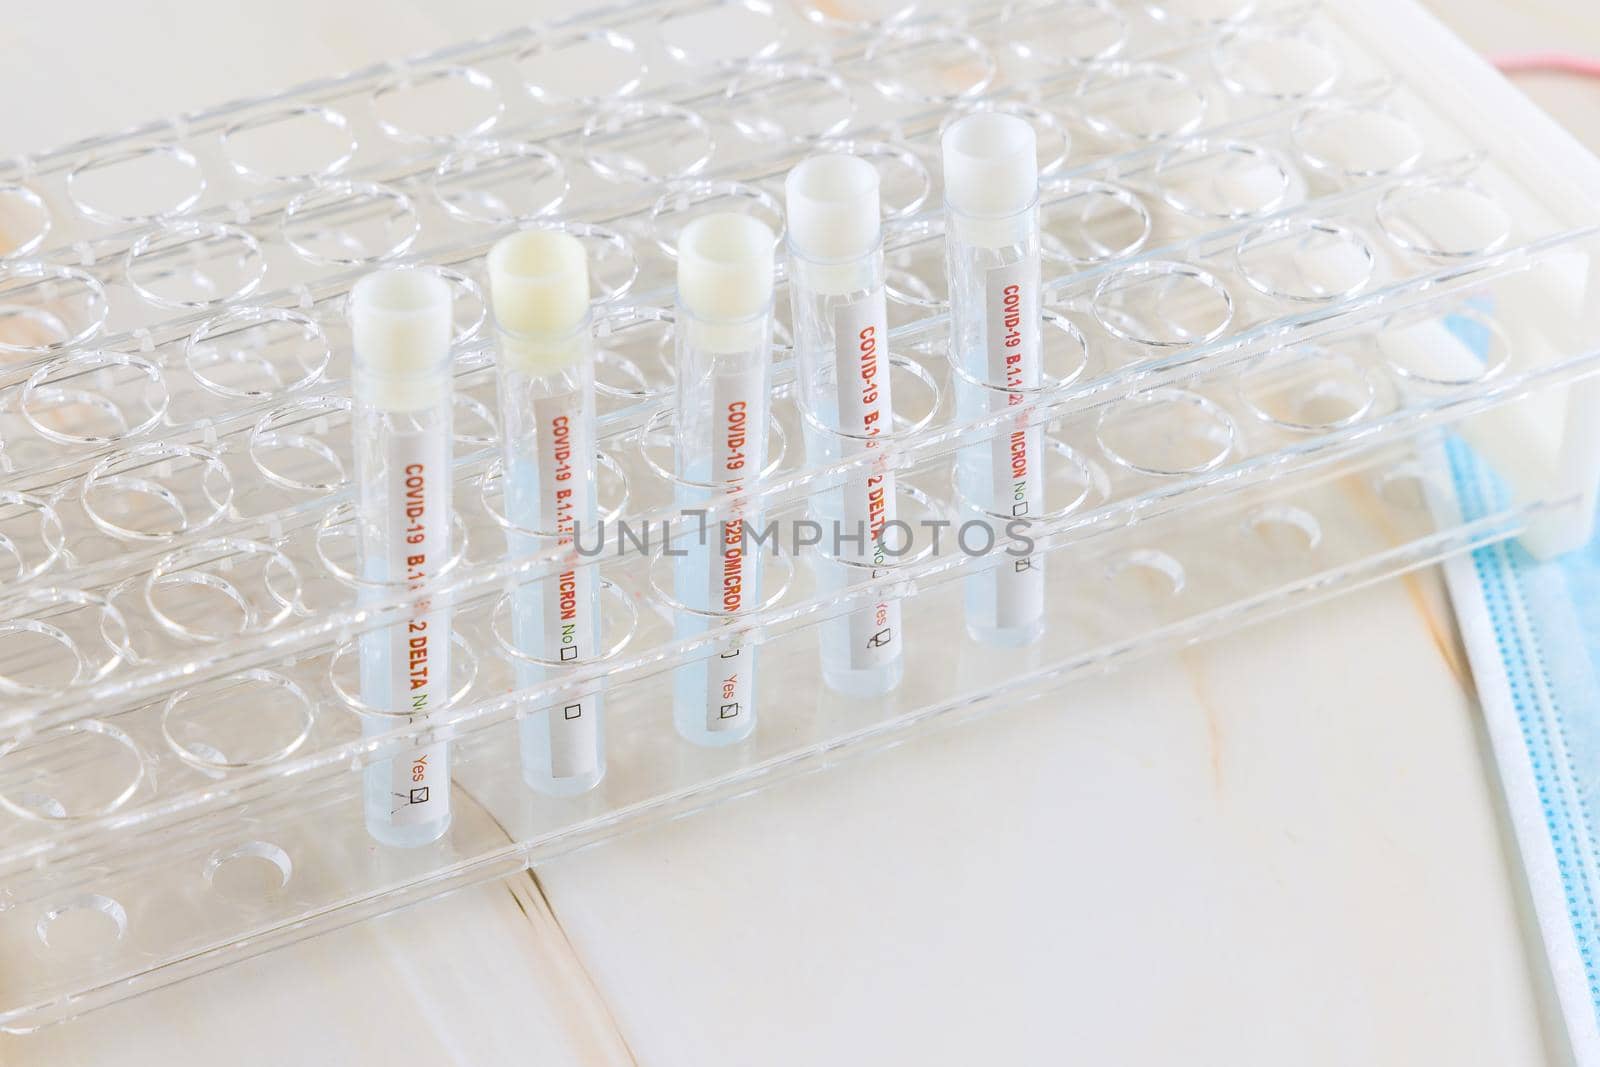 Tube containing a swab sample for COVID-19 that has tested positive with testing for presence of new version Omicron of coronavirus